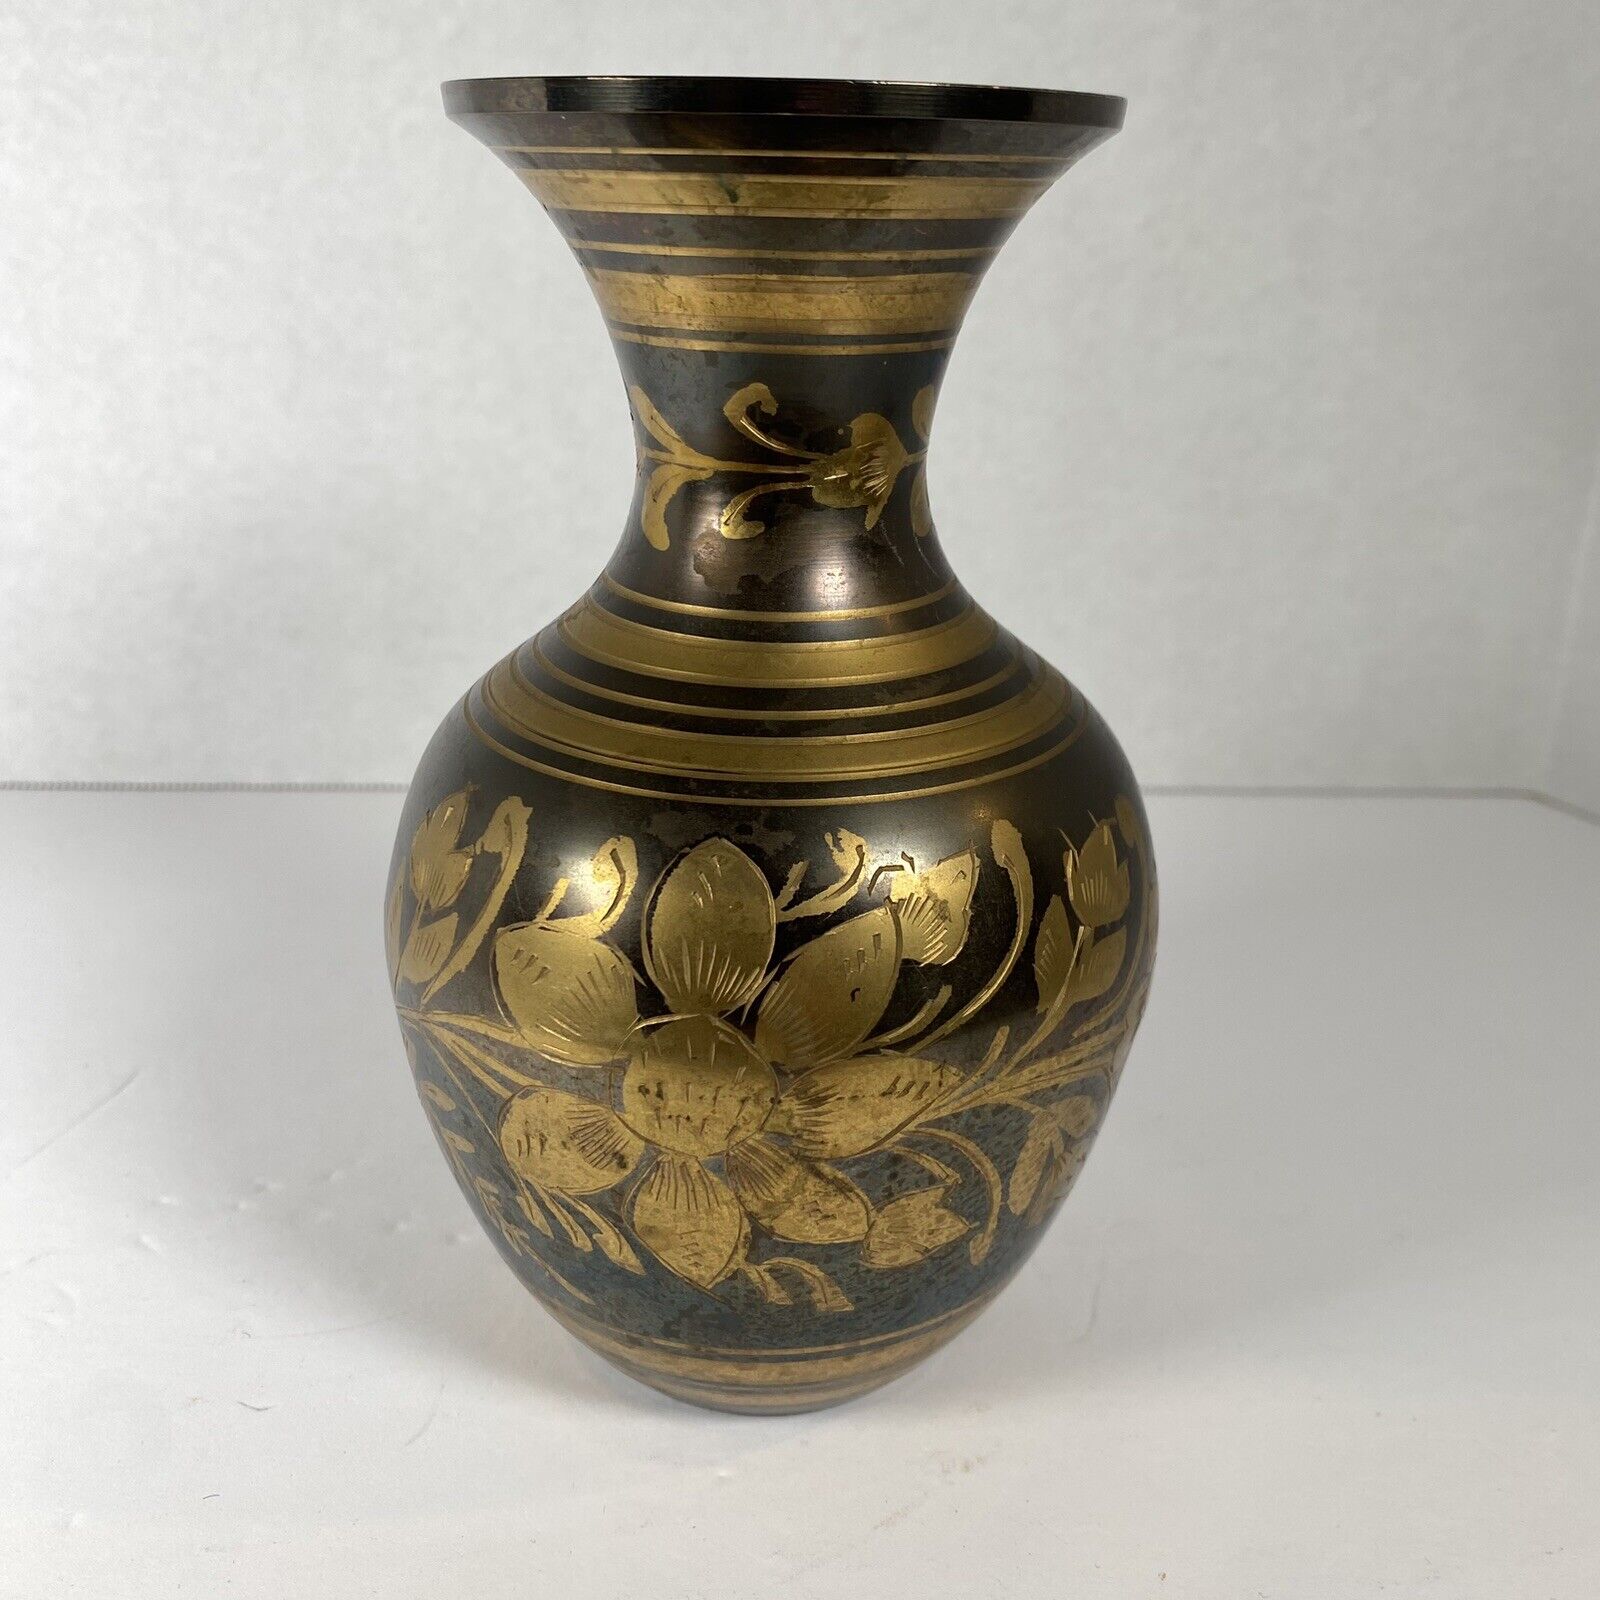 Vintage Solid Brass Floral Etched Vase Handmade in India 7” Tall